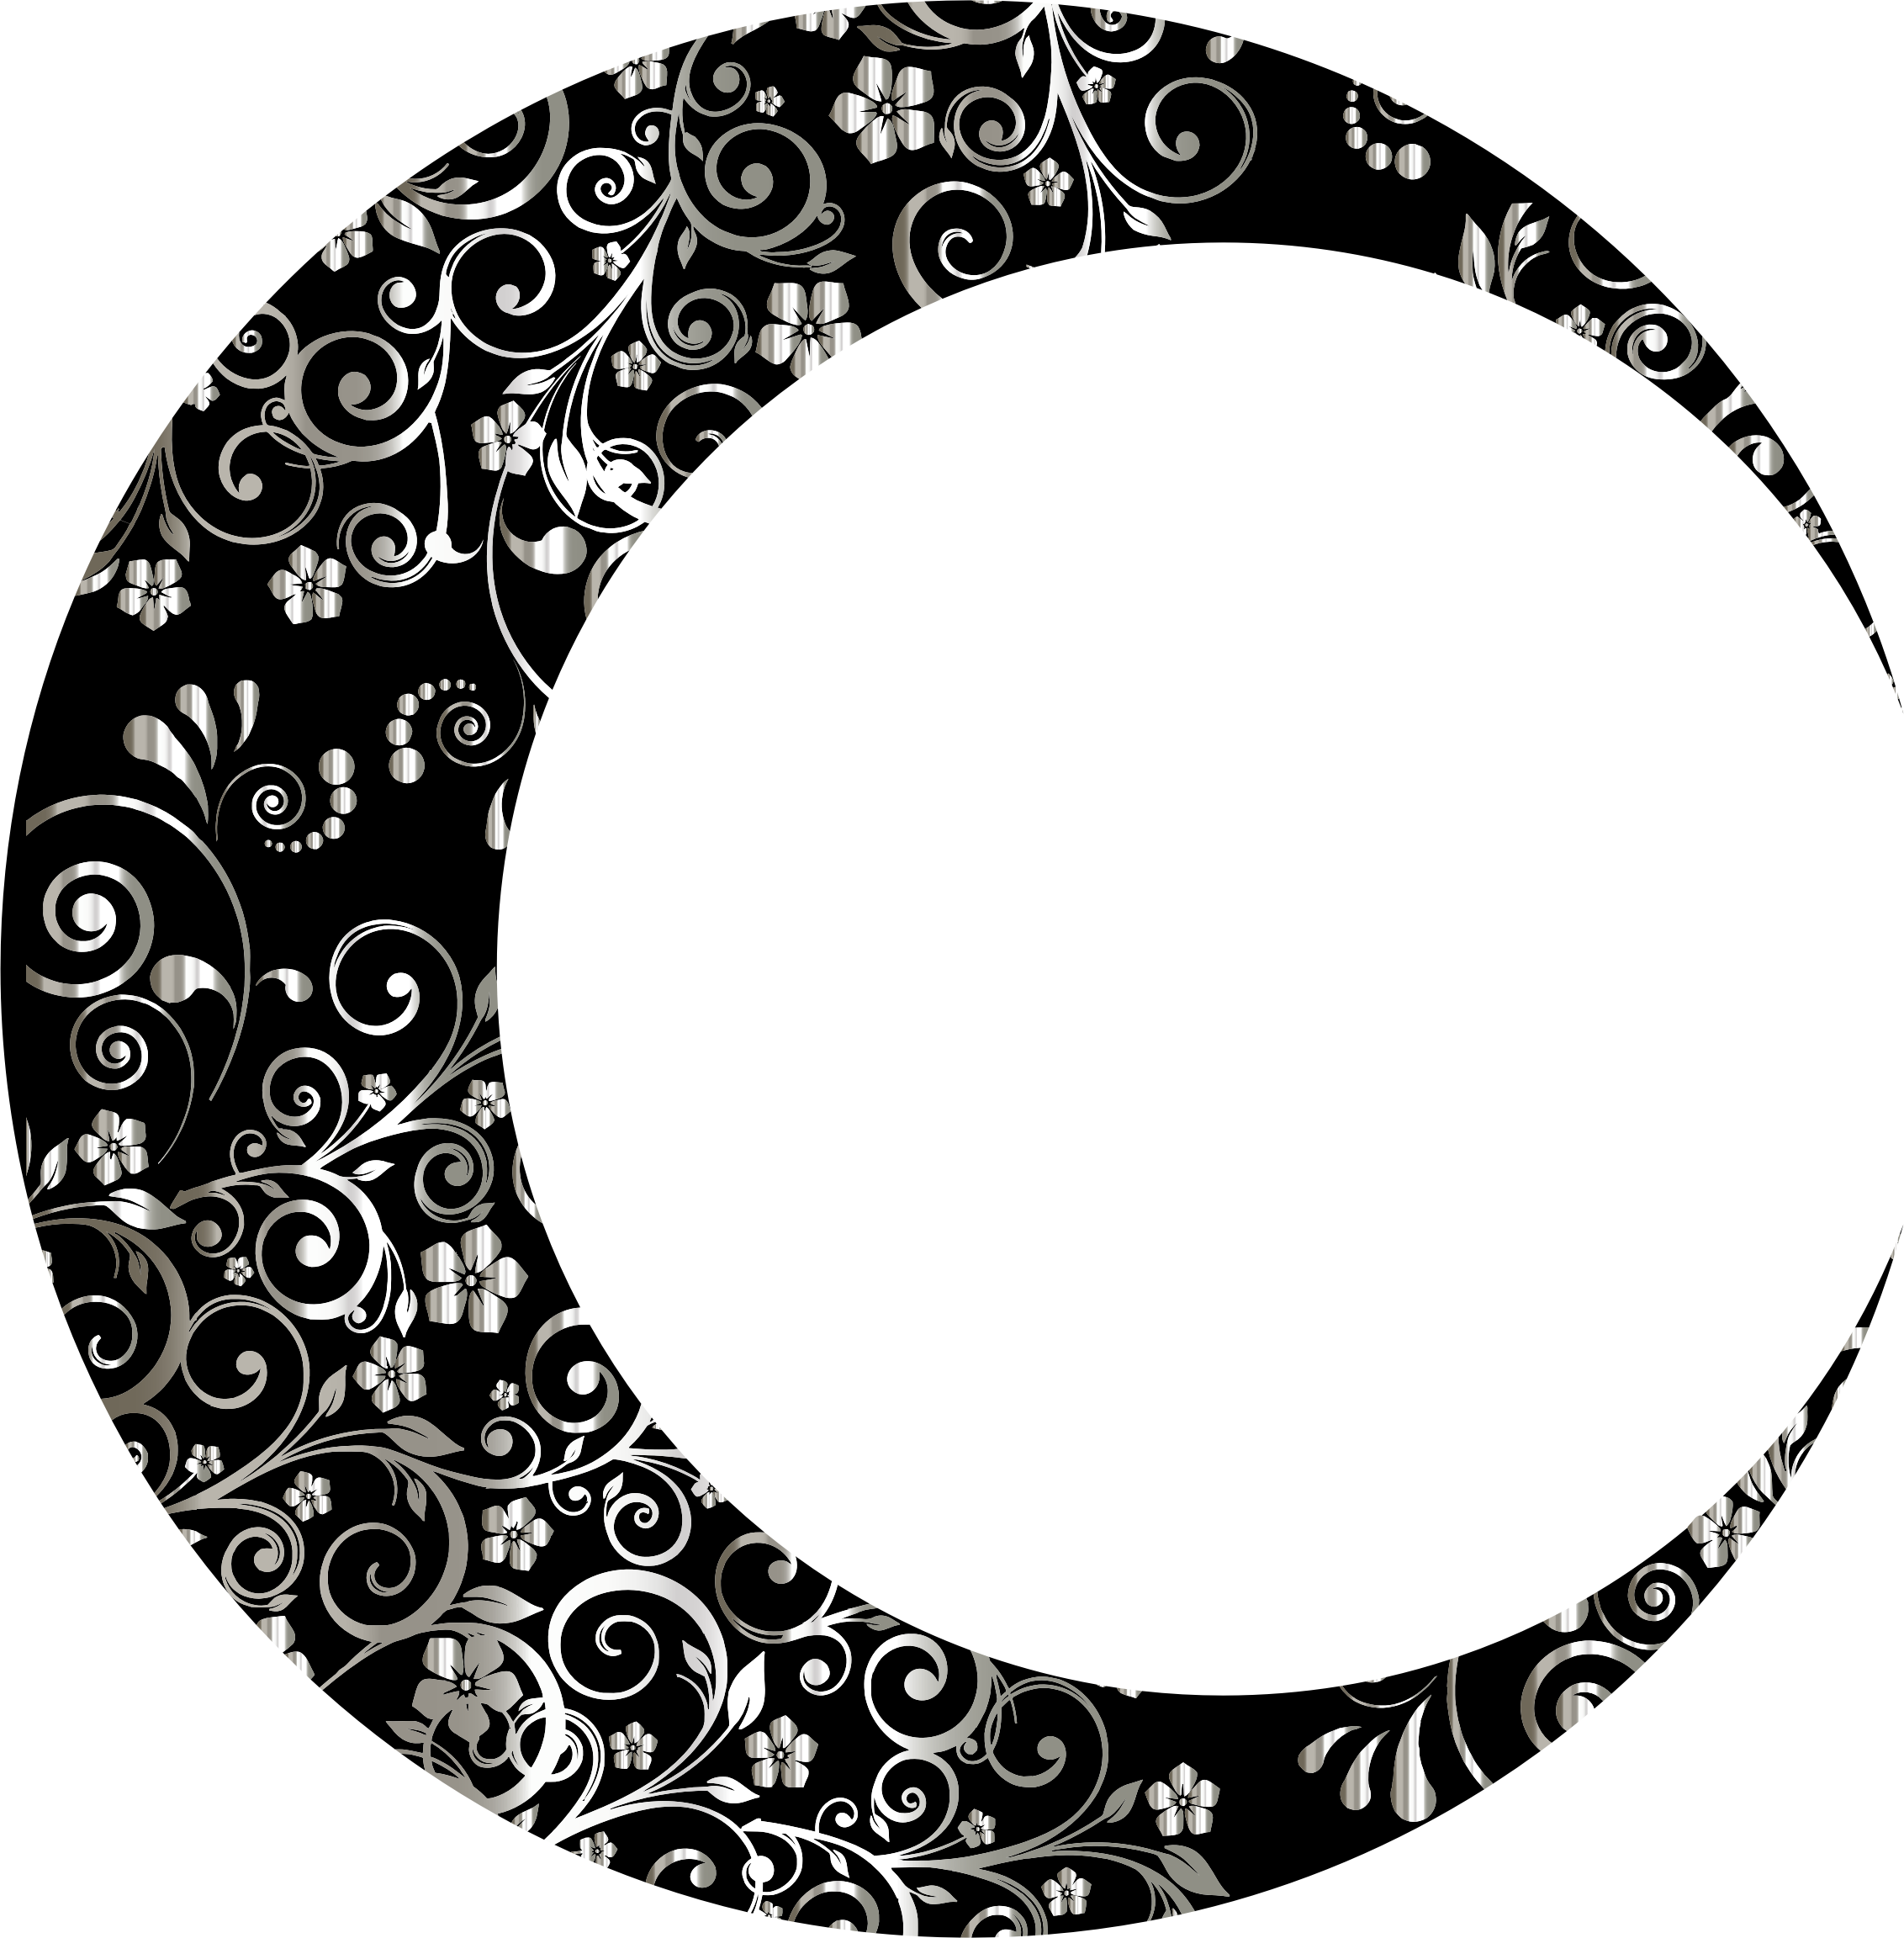 Moon clipart black and white, Moon black and white Transparent FREE for